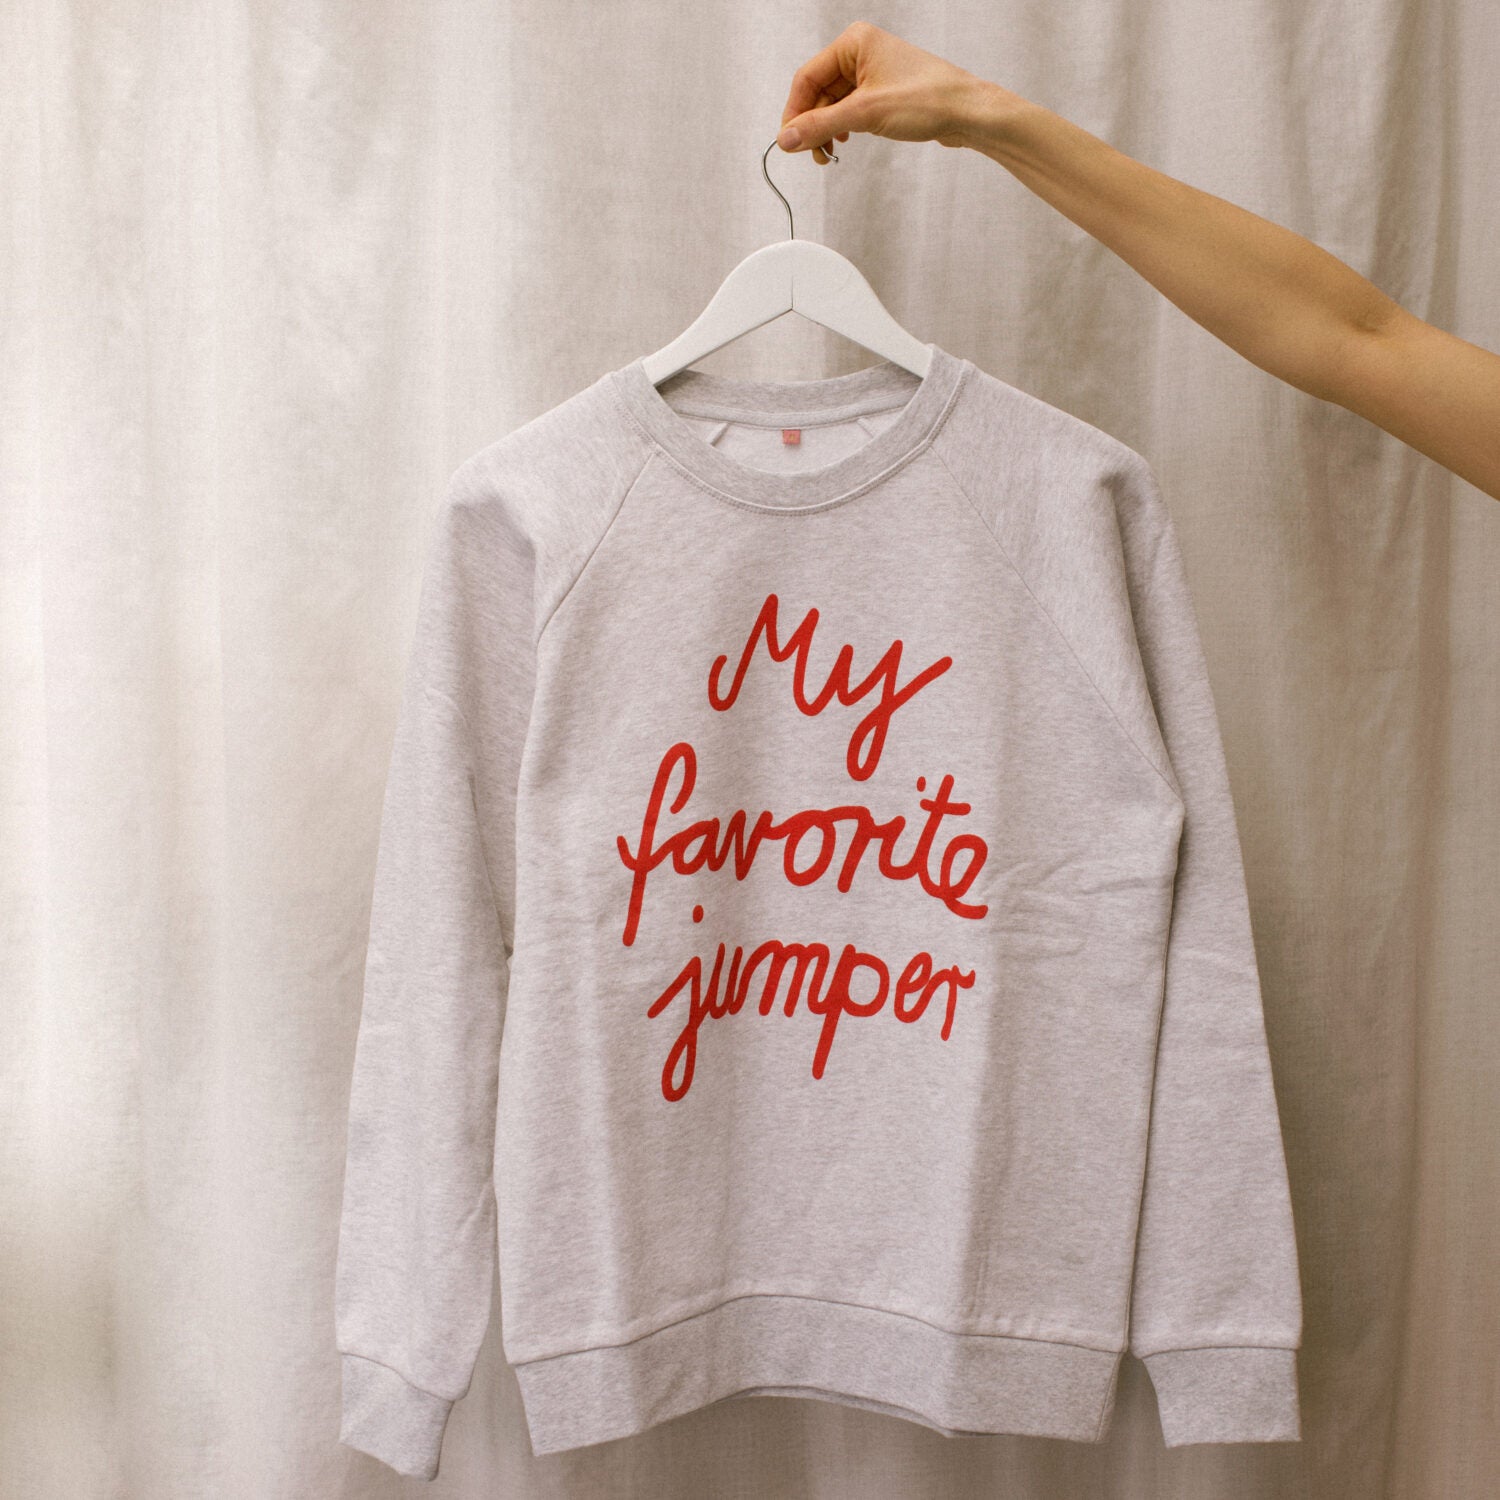 The colorful crew "My favorite Jumper" Sweater